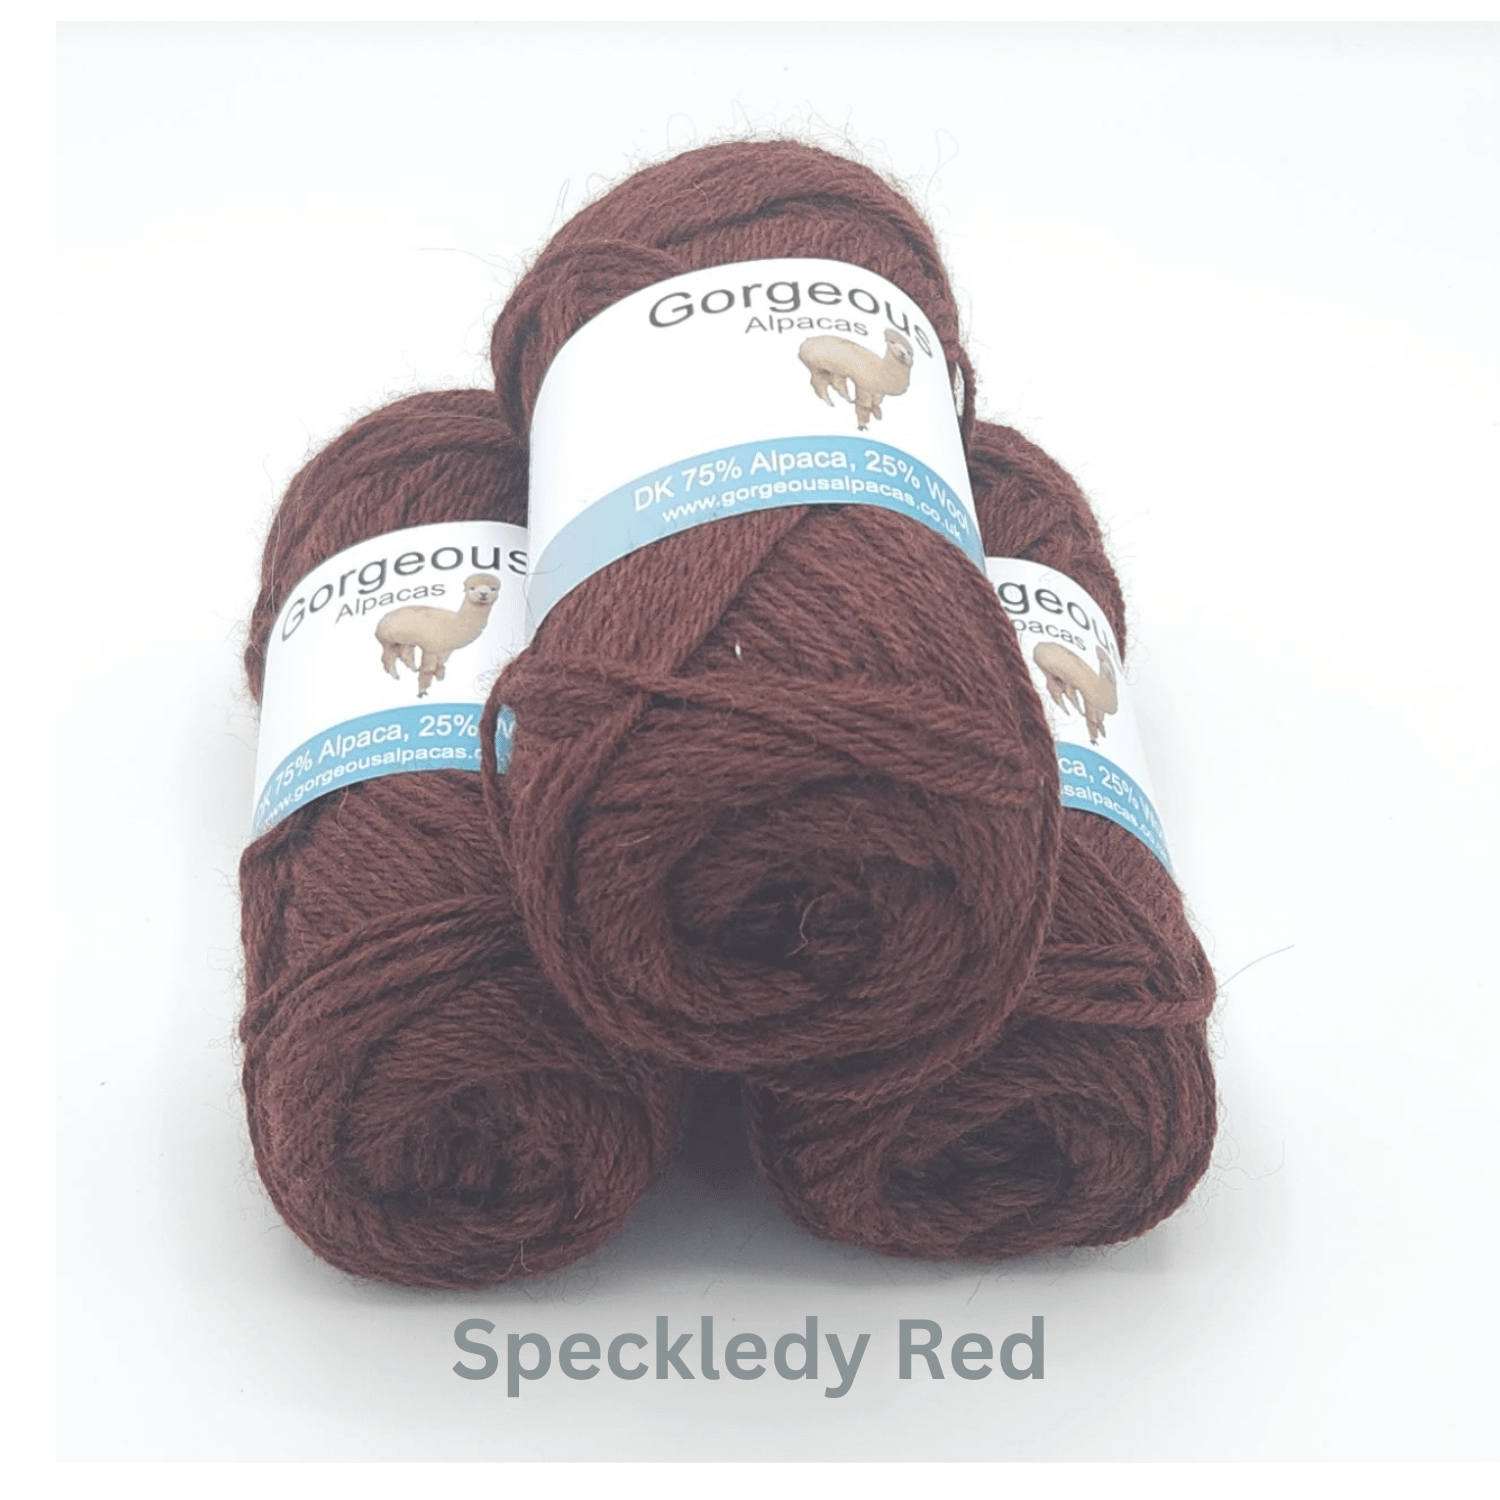 DK alpaca wool from British and Irish farms shown here in Speckledy Red